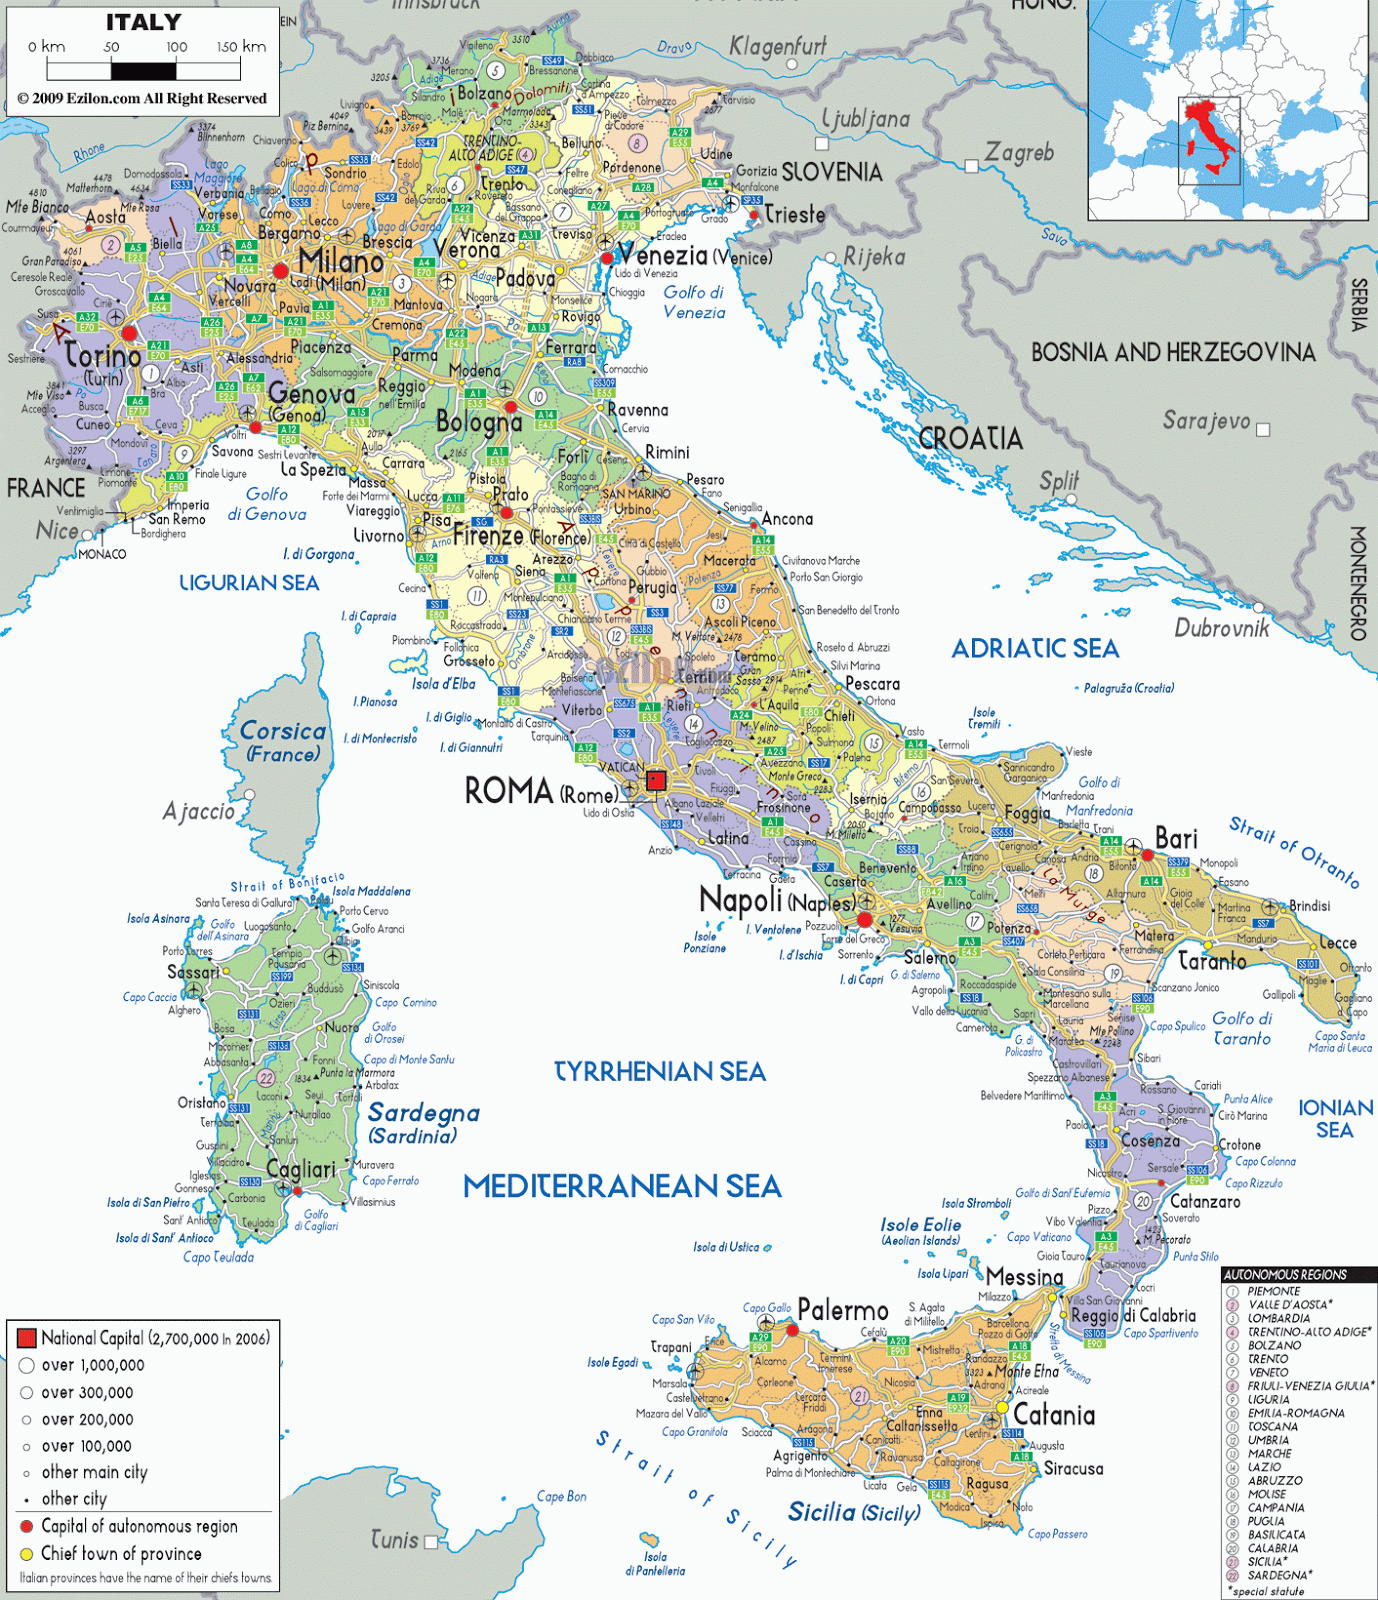 ITALY - GEOGRAPHICAL MAPS OF ITALY